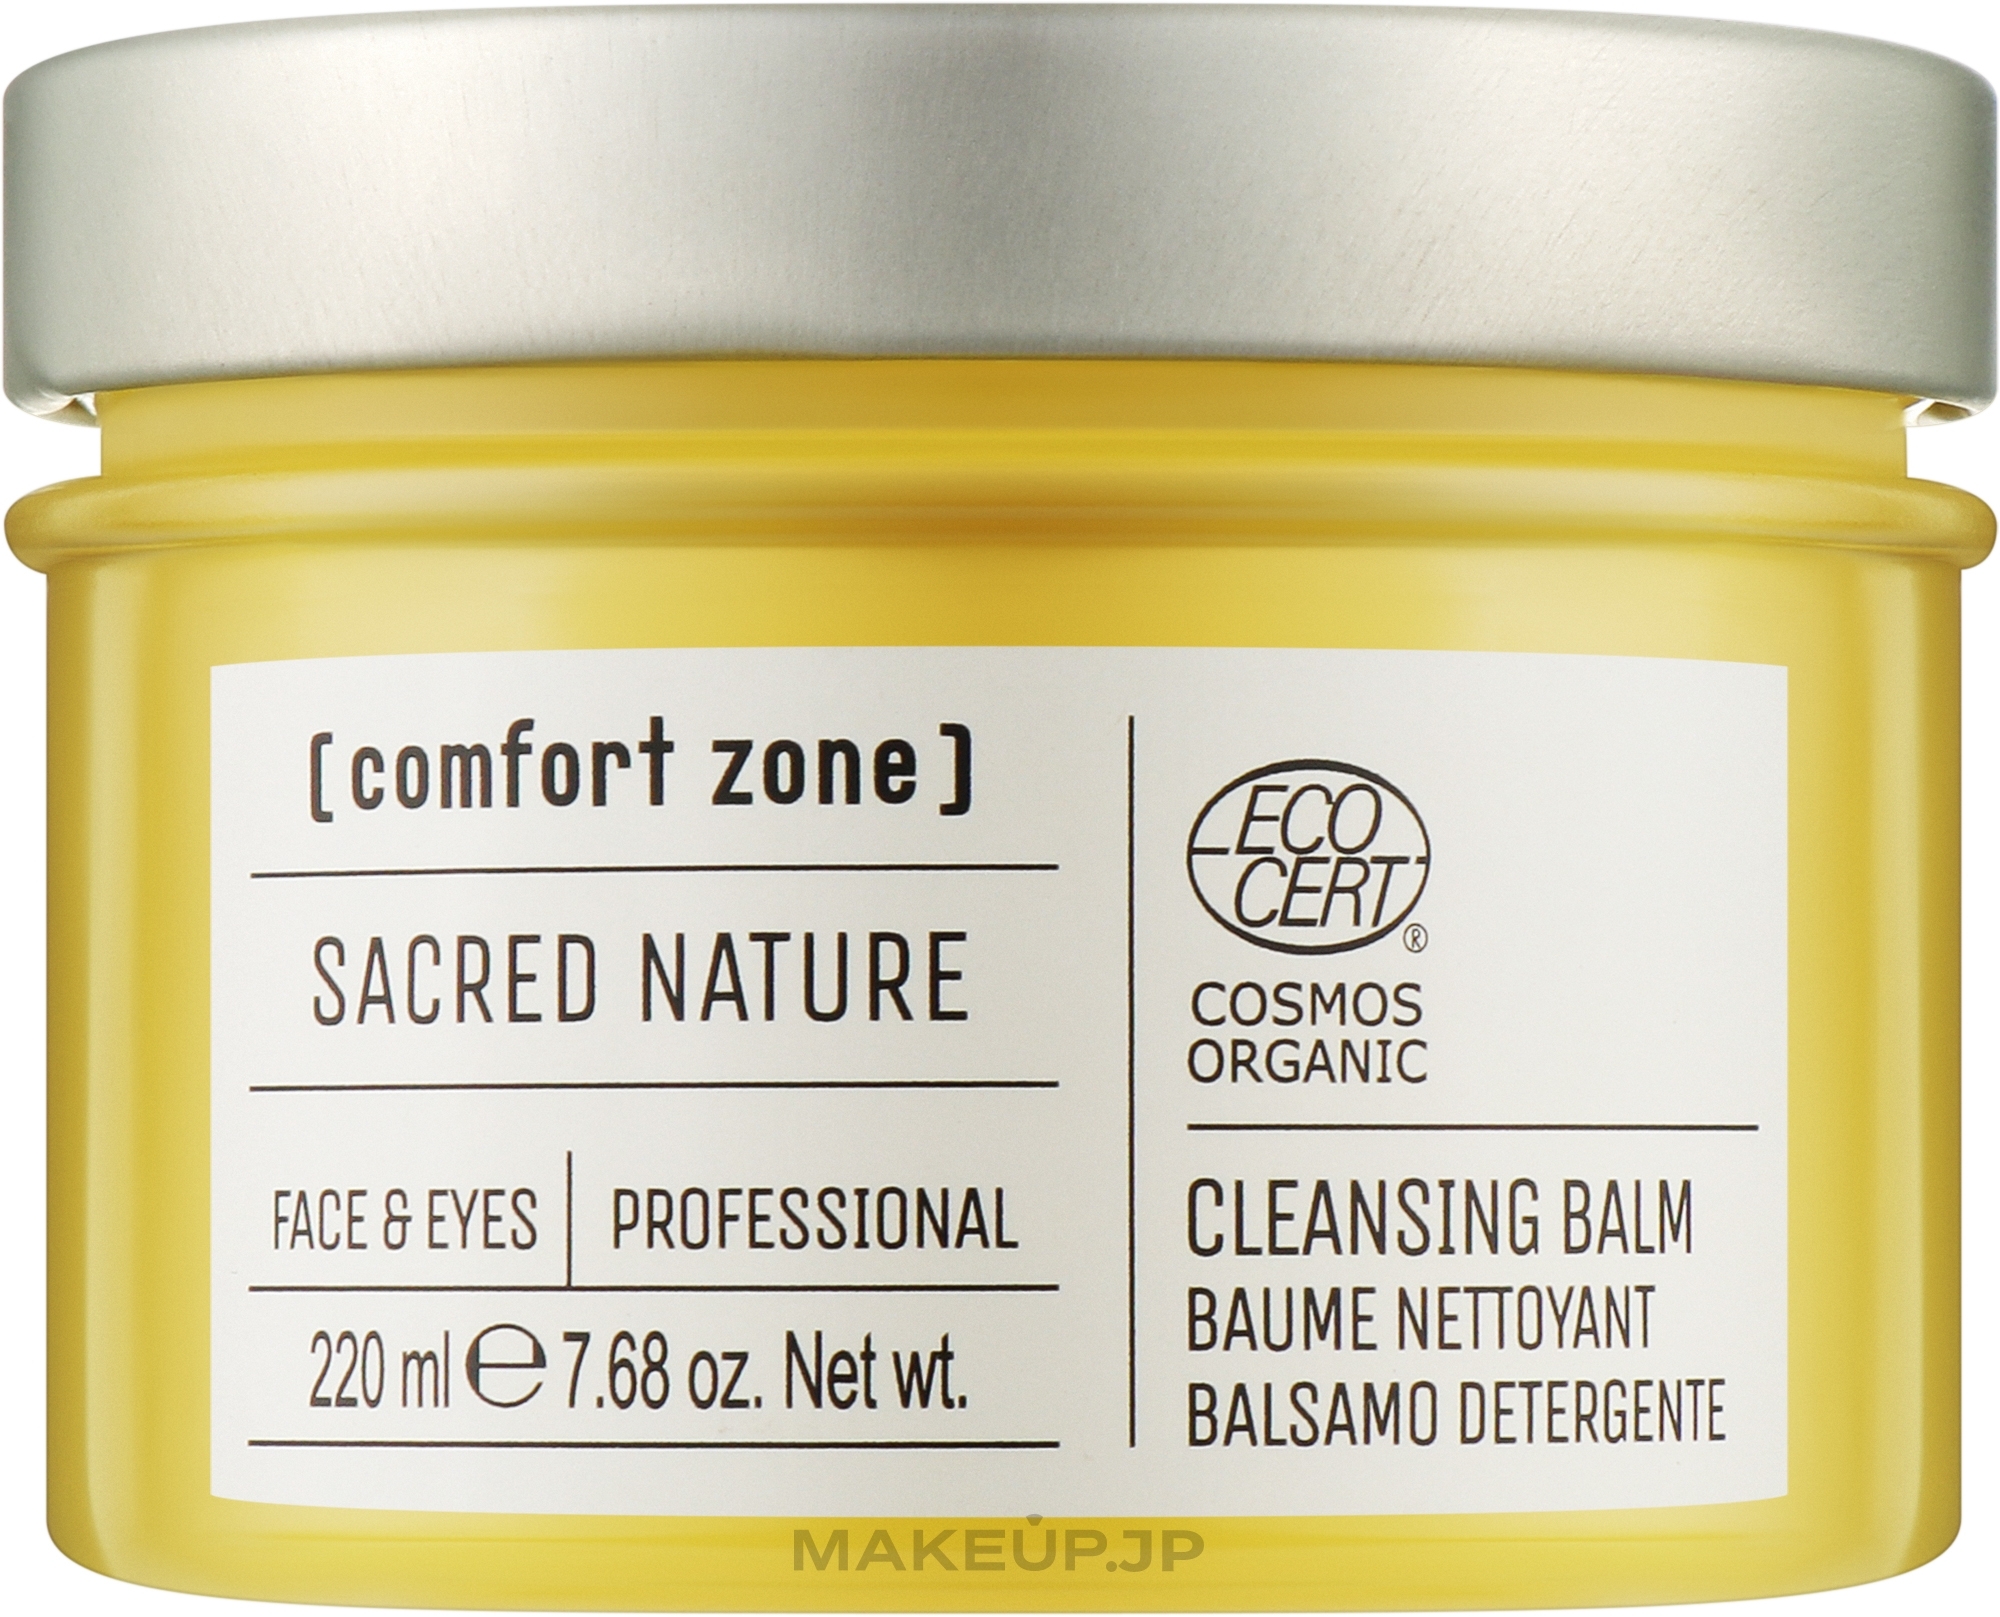 Cleansing Face Balm - Comfort Zone Sacred Nature Cleansing Balm — photo 220 ml